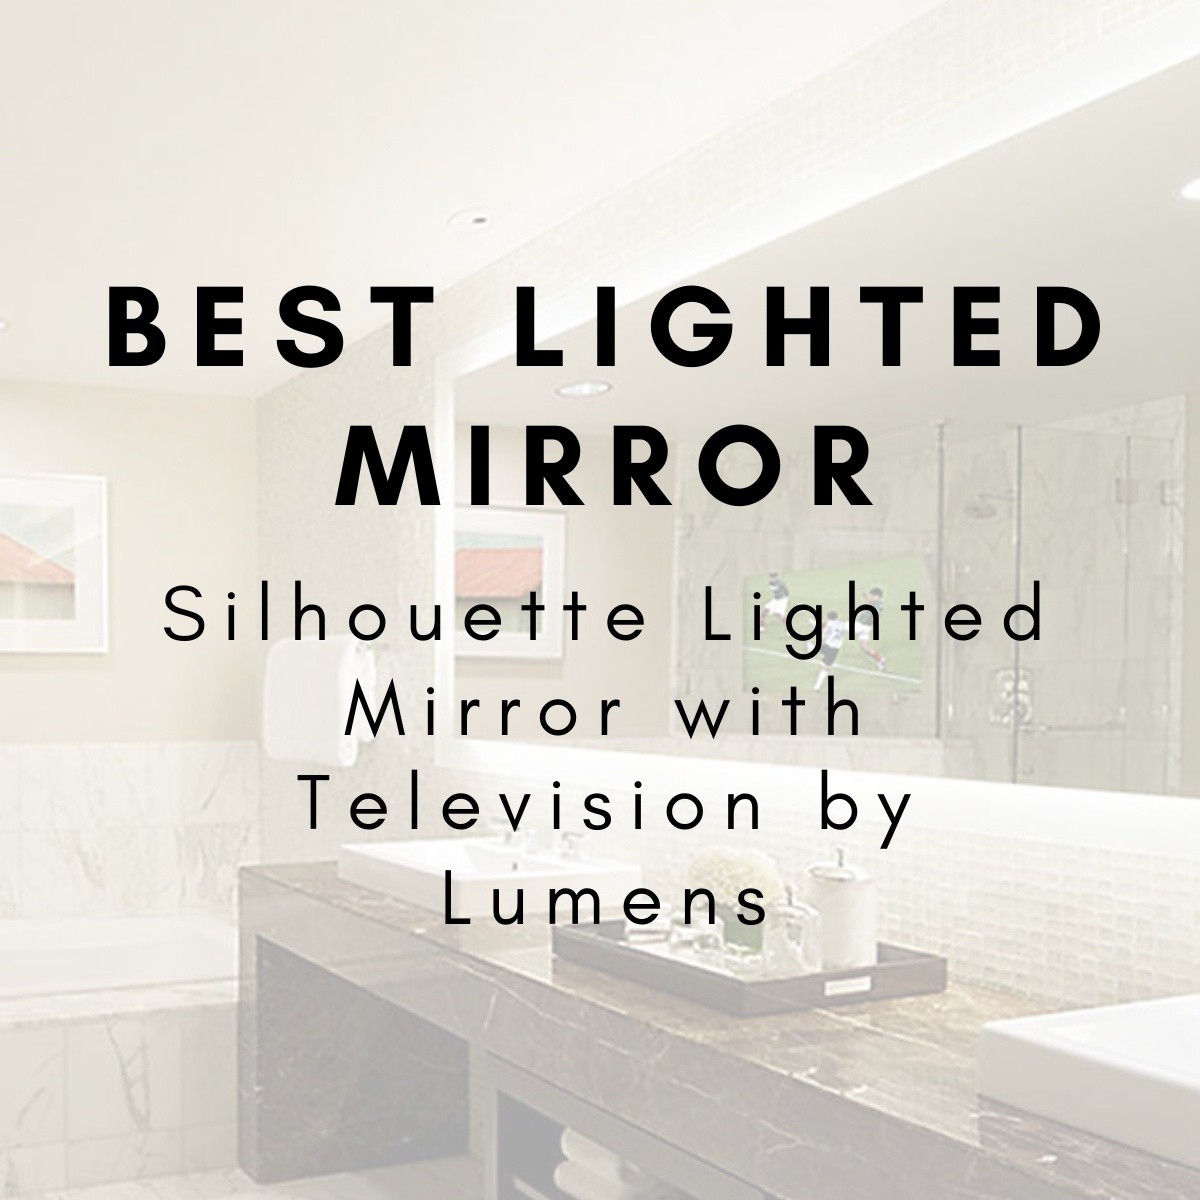 Silhouette Lighted Mirror with Television by Lumens